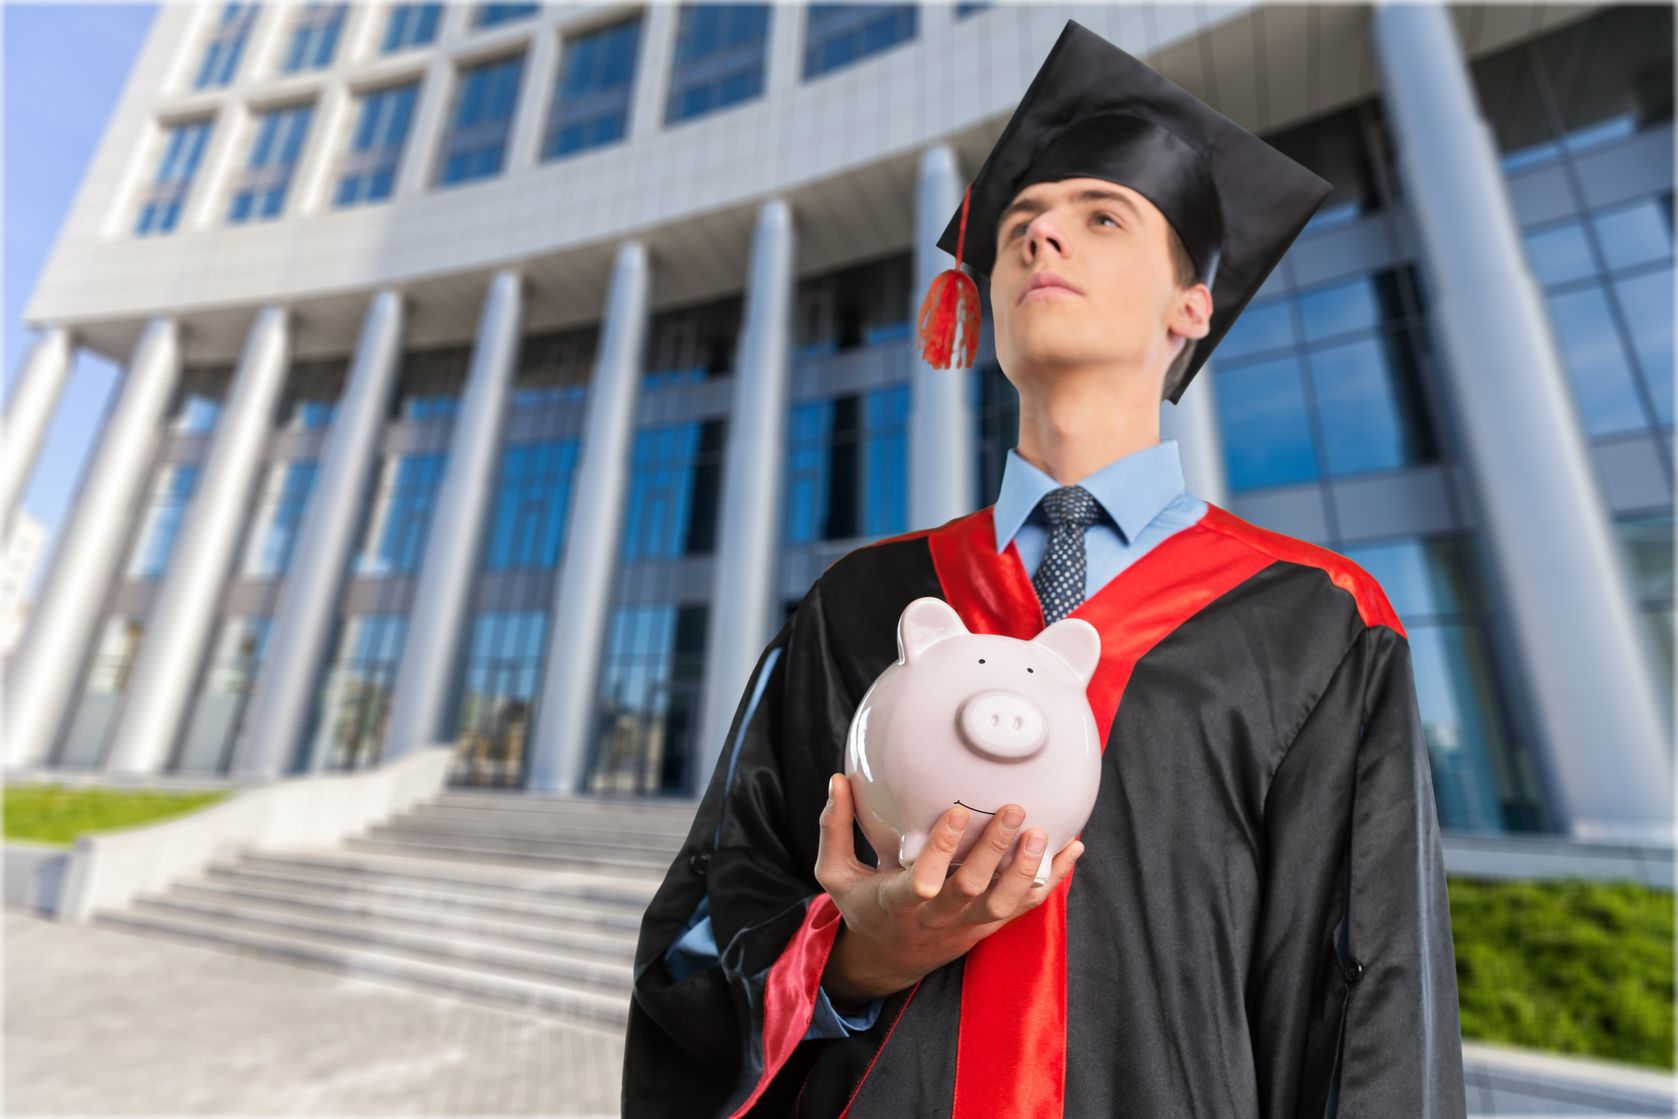 male student in graduation cap and gown holding piggy bank concept for Kiwanis Scholarship